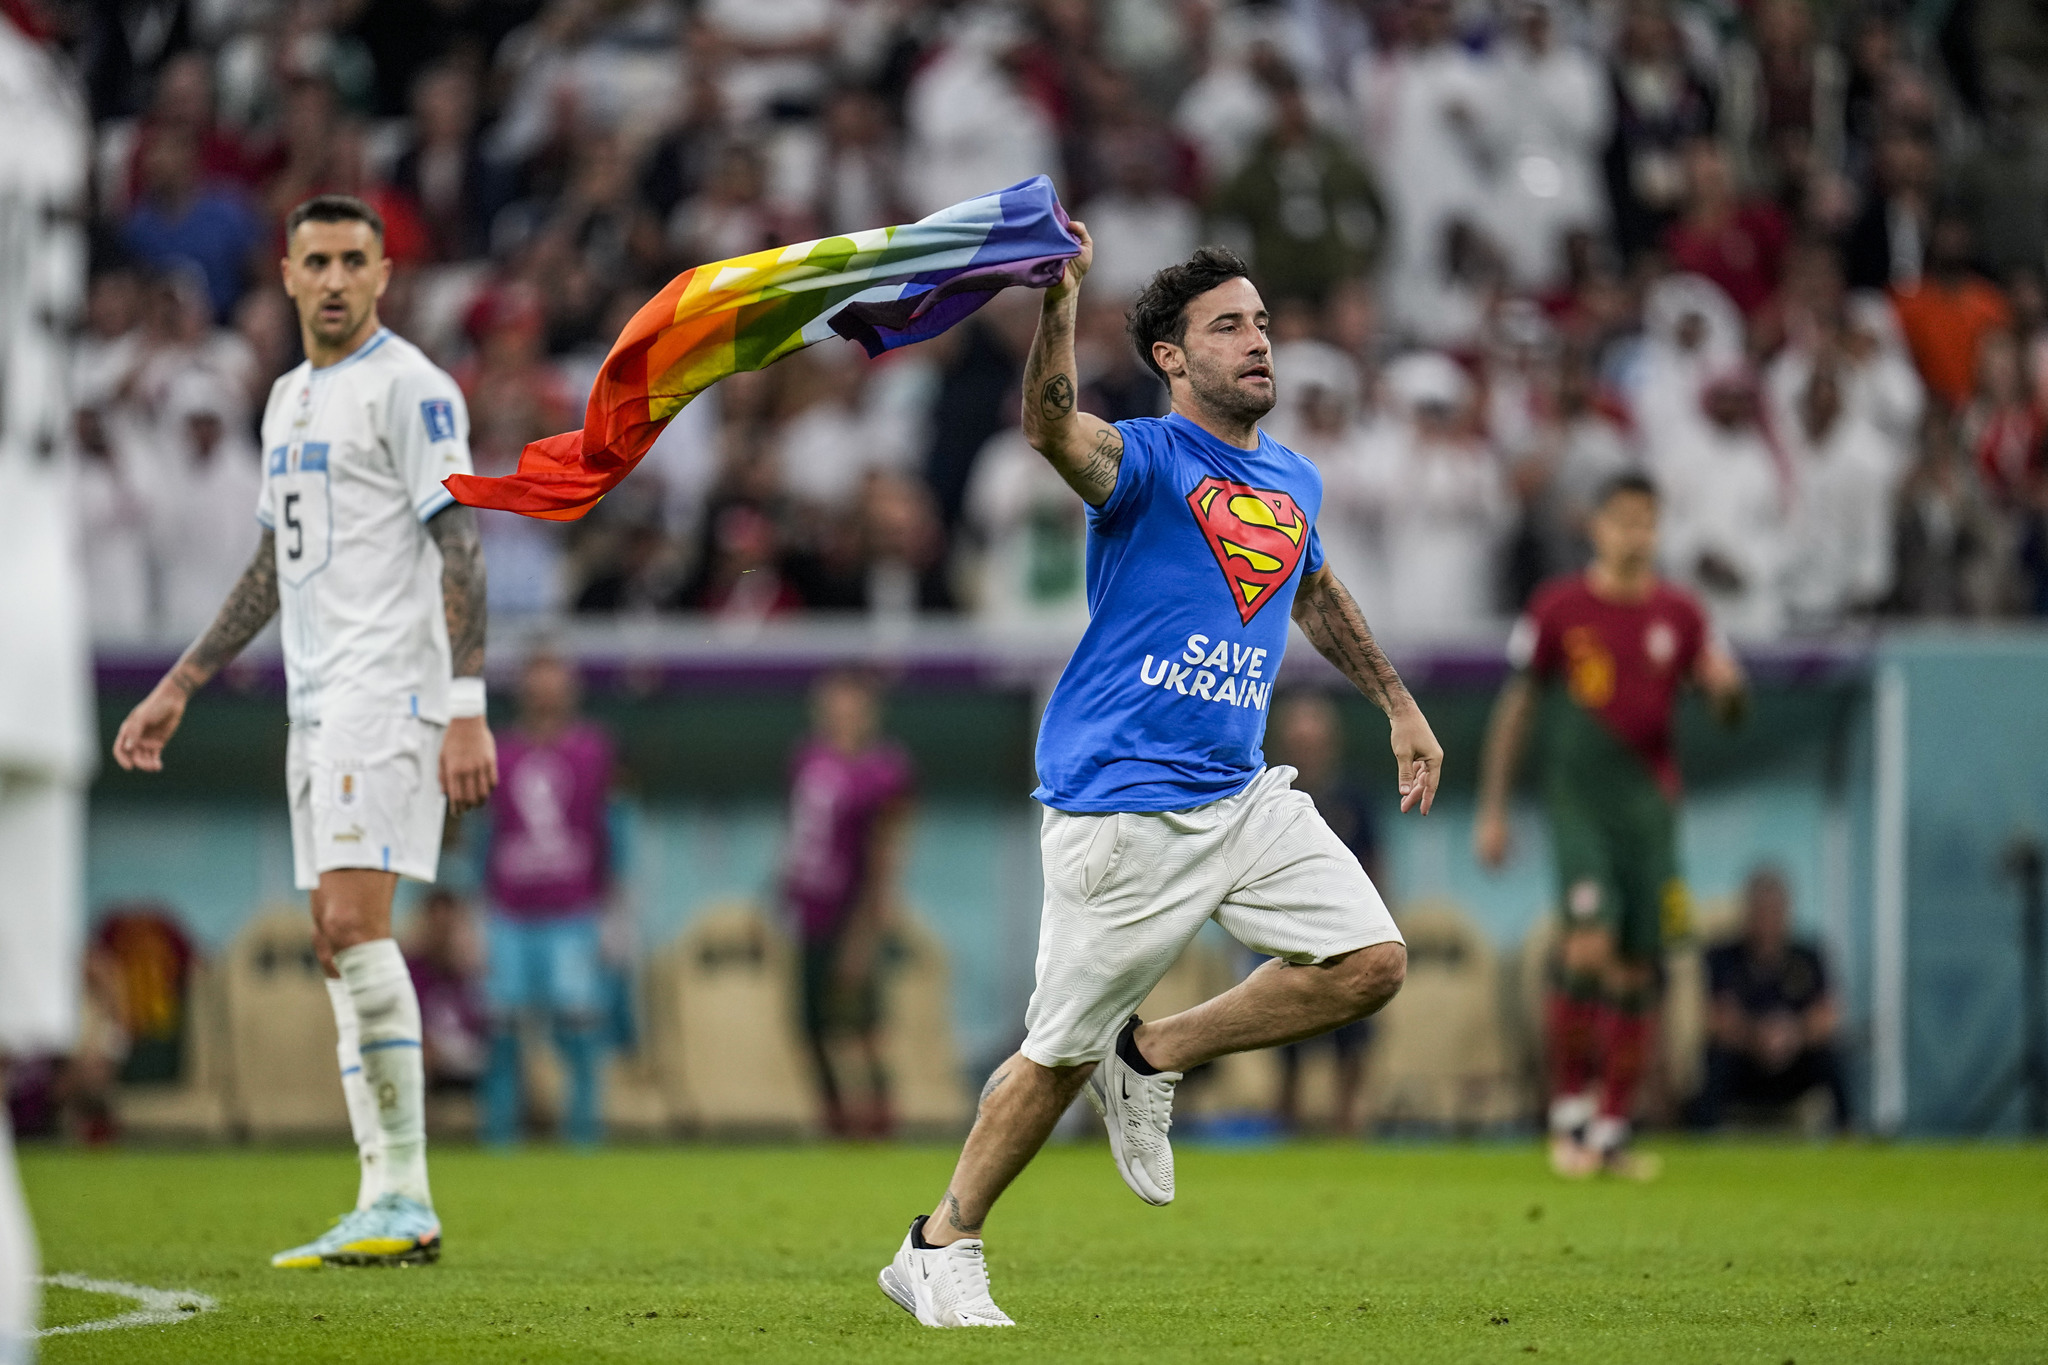 A pitch invader runs across the field with a  lt;HIT gt;rainbow lt;/HIT gt; flag during the  lt;HIT gt;World lt;/HIT gt;  lt;HIT gt;Cup lt;/HIT gt; group H soccer match between Portugal and Uruguay, at the Lusail Stadium in Lusail, Qatar, Monday, Nov. 28, 2022. (AP Photo/Abbie Parr)